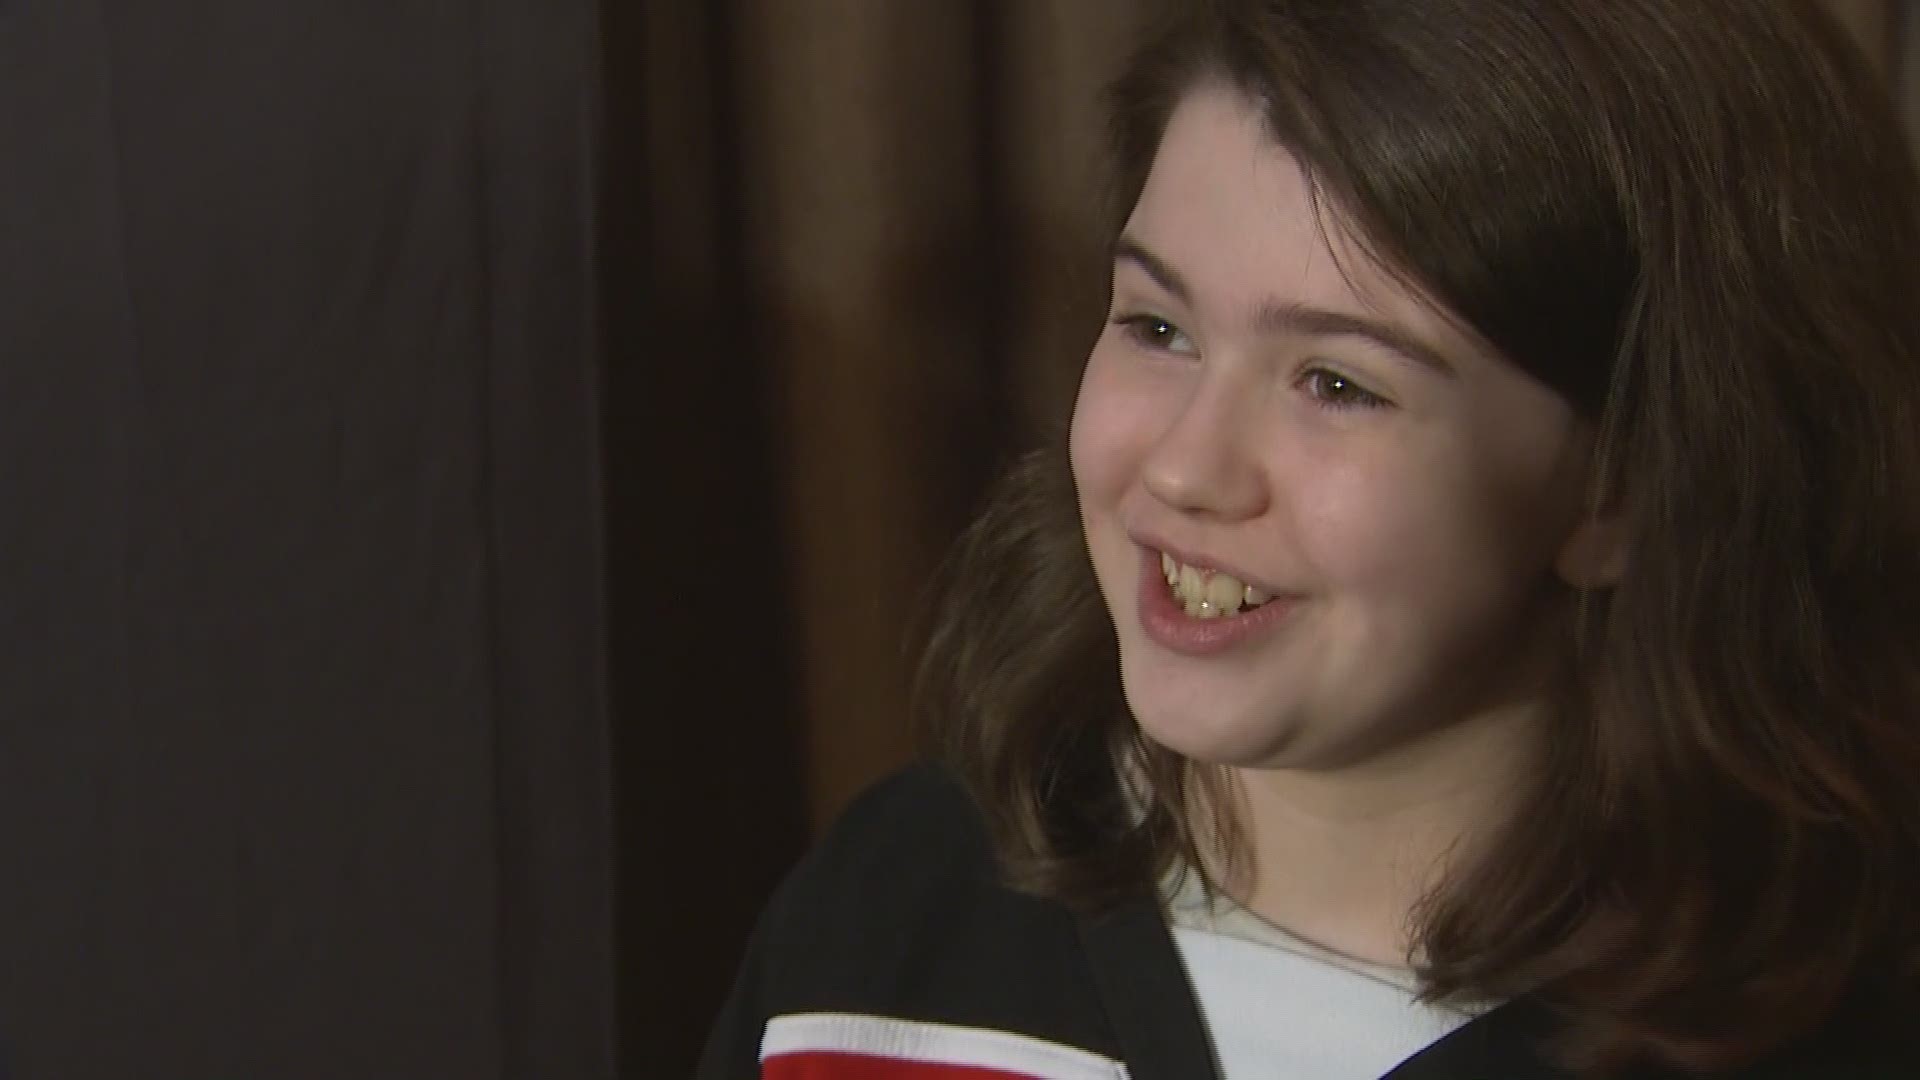 12-year-old Jayna from Redmond, Washington talks about her excitement for Seattle to get an NHL expansion team. KING 5's Chris Daniels caught up with her.